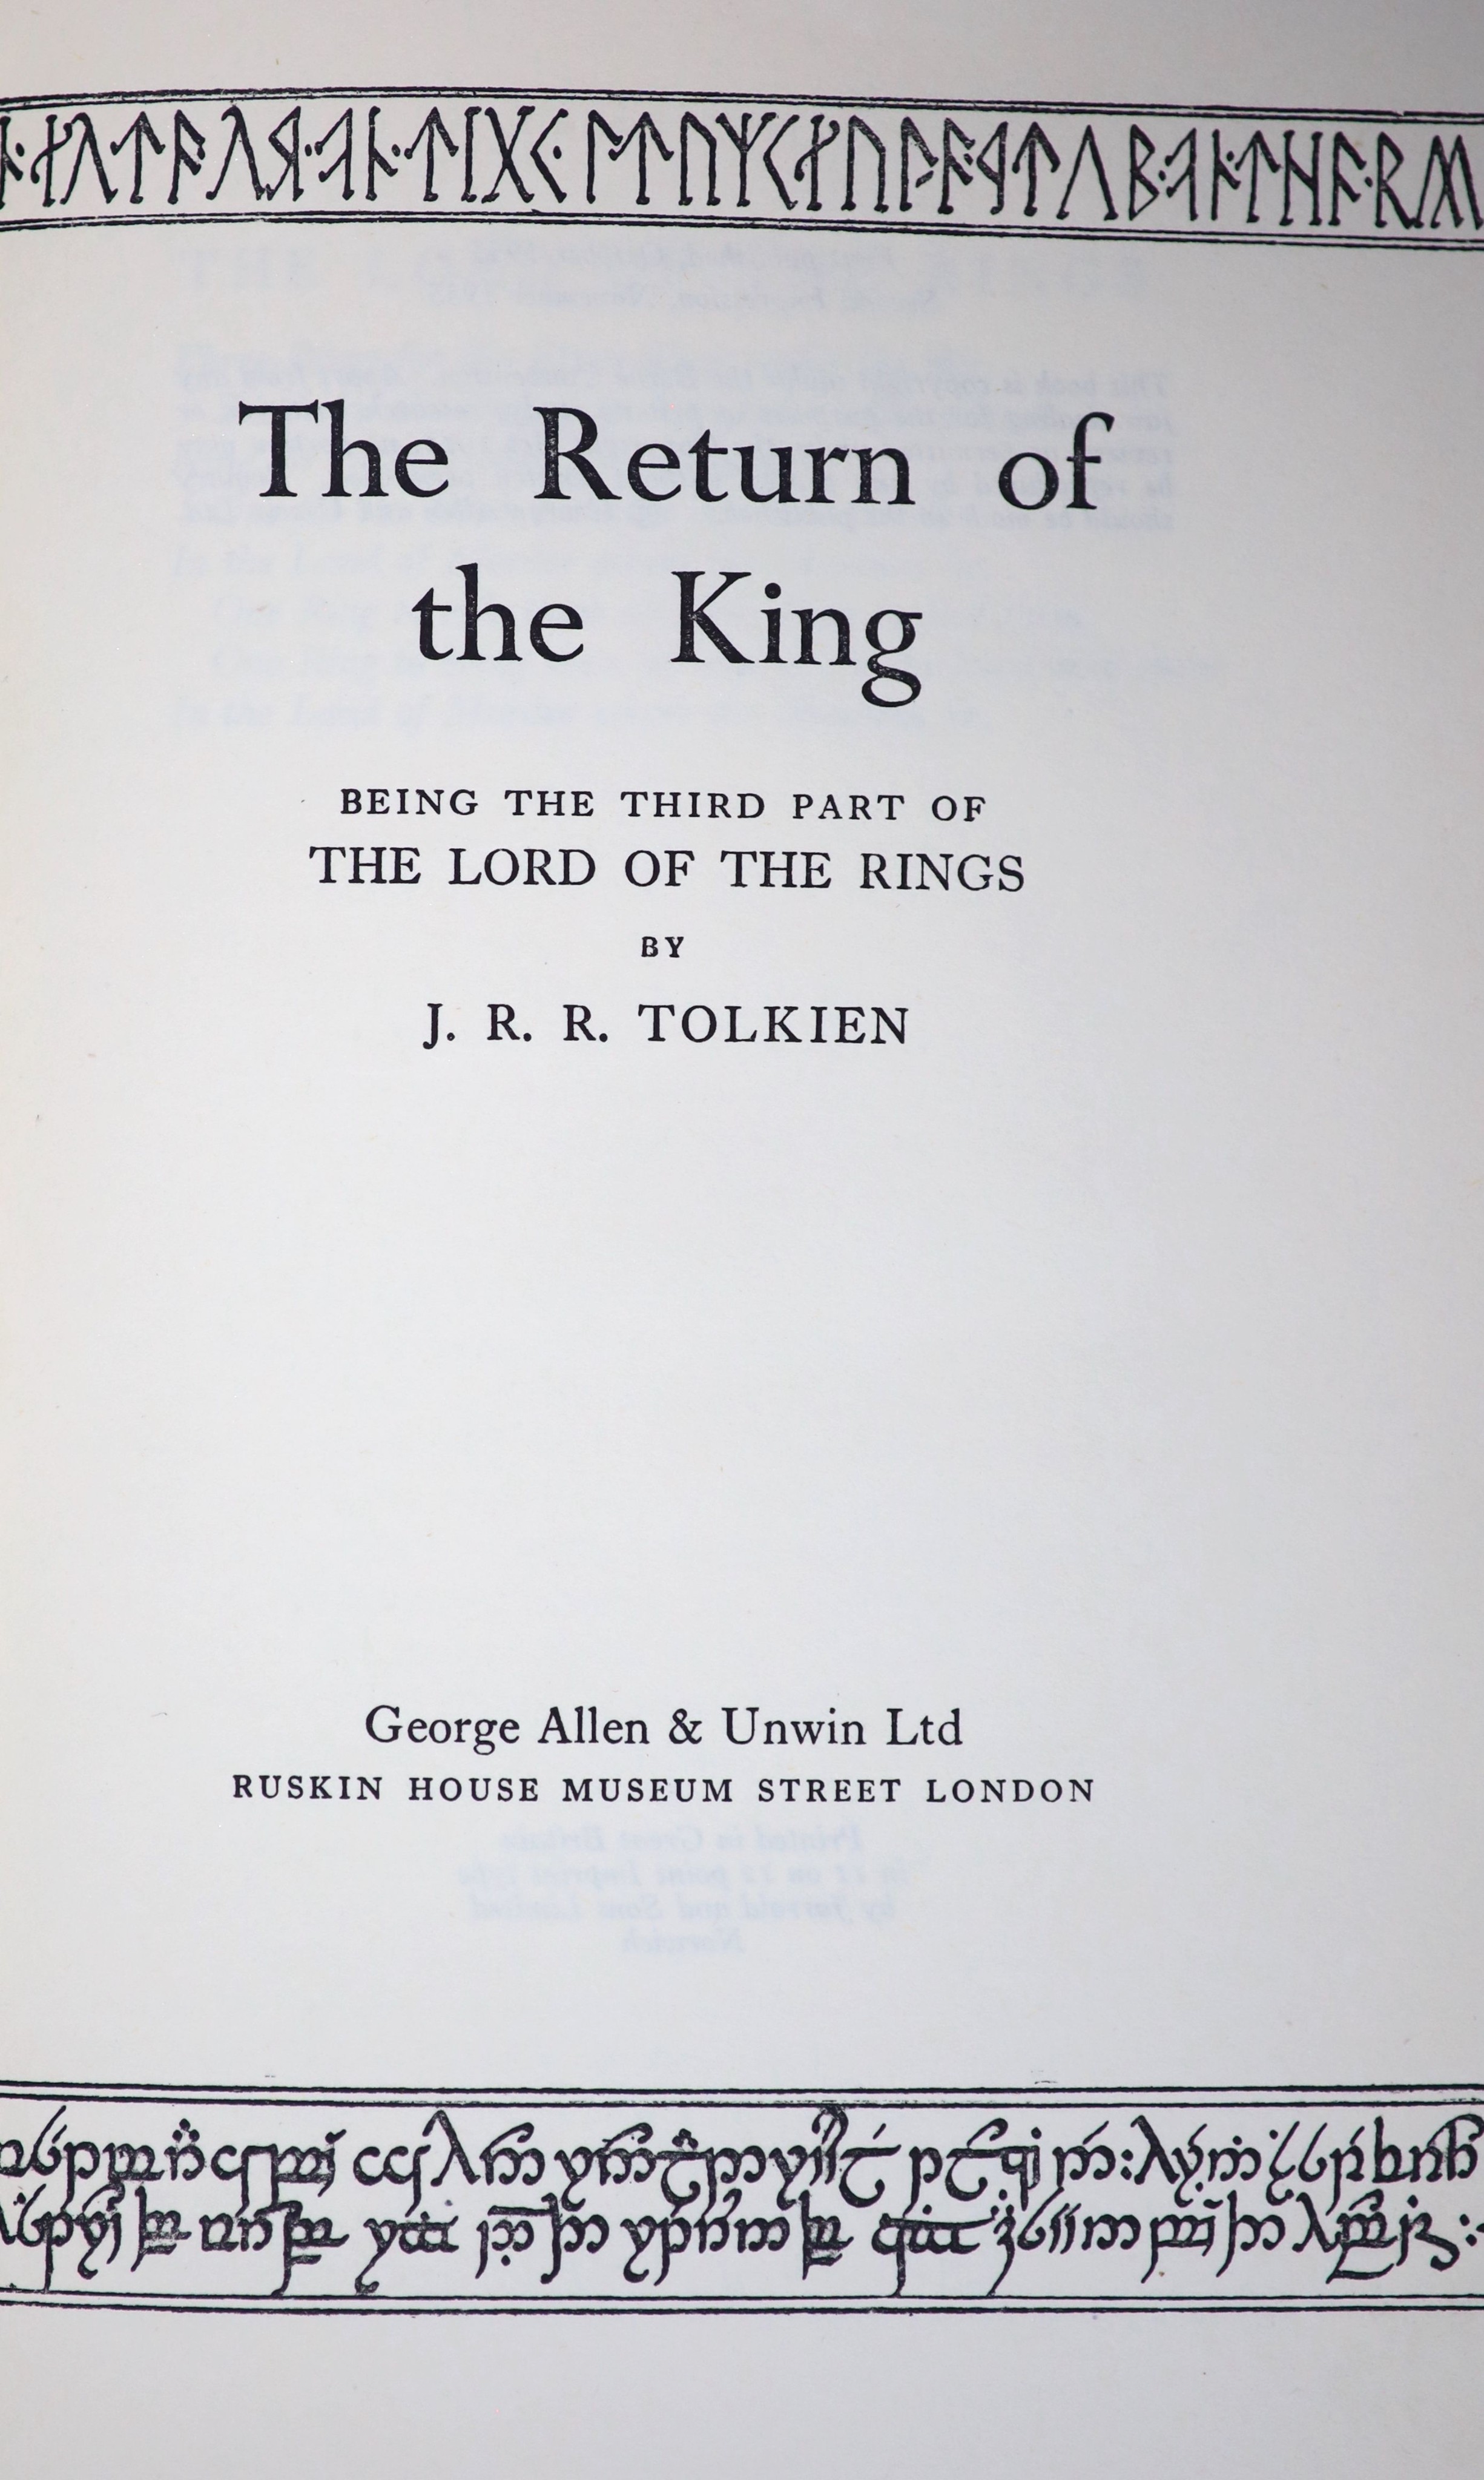 Tolkien, J.R.R - The Lord of the Rings, 3 vols, The Fellowship of the Ring, 5th impression, 1956; The Two Towers, 4th impression, 1956 and The Return of the King, 2nd impression, 1955, rebound red cloth, school prize bin